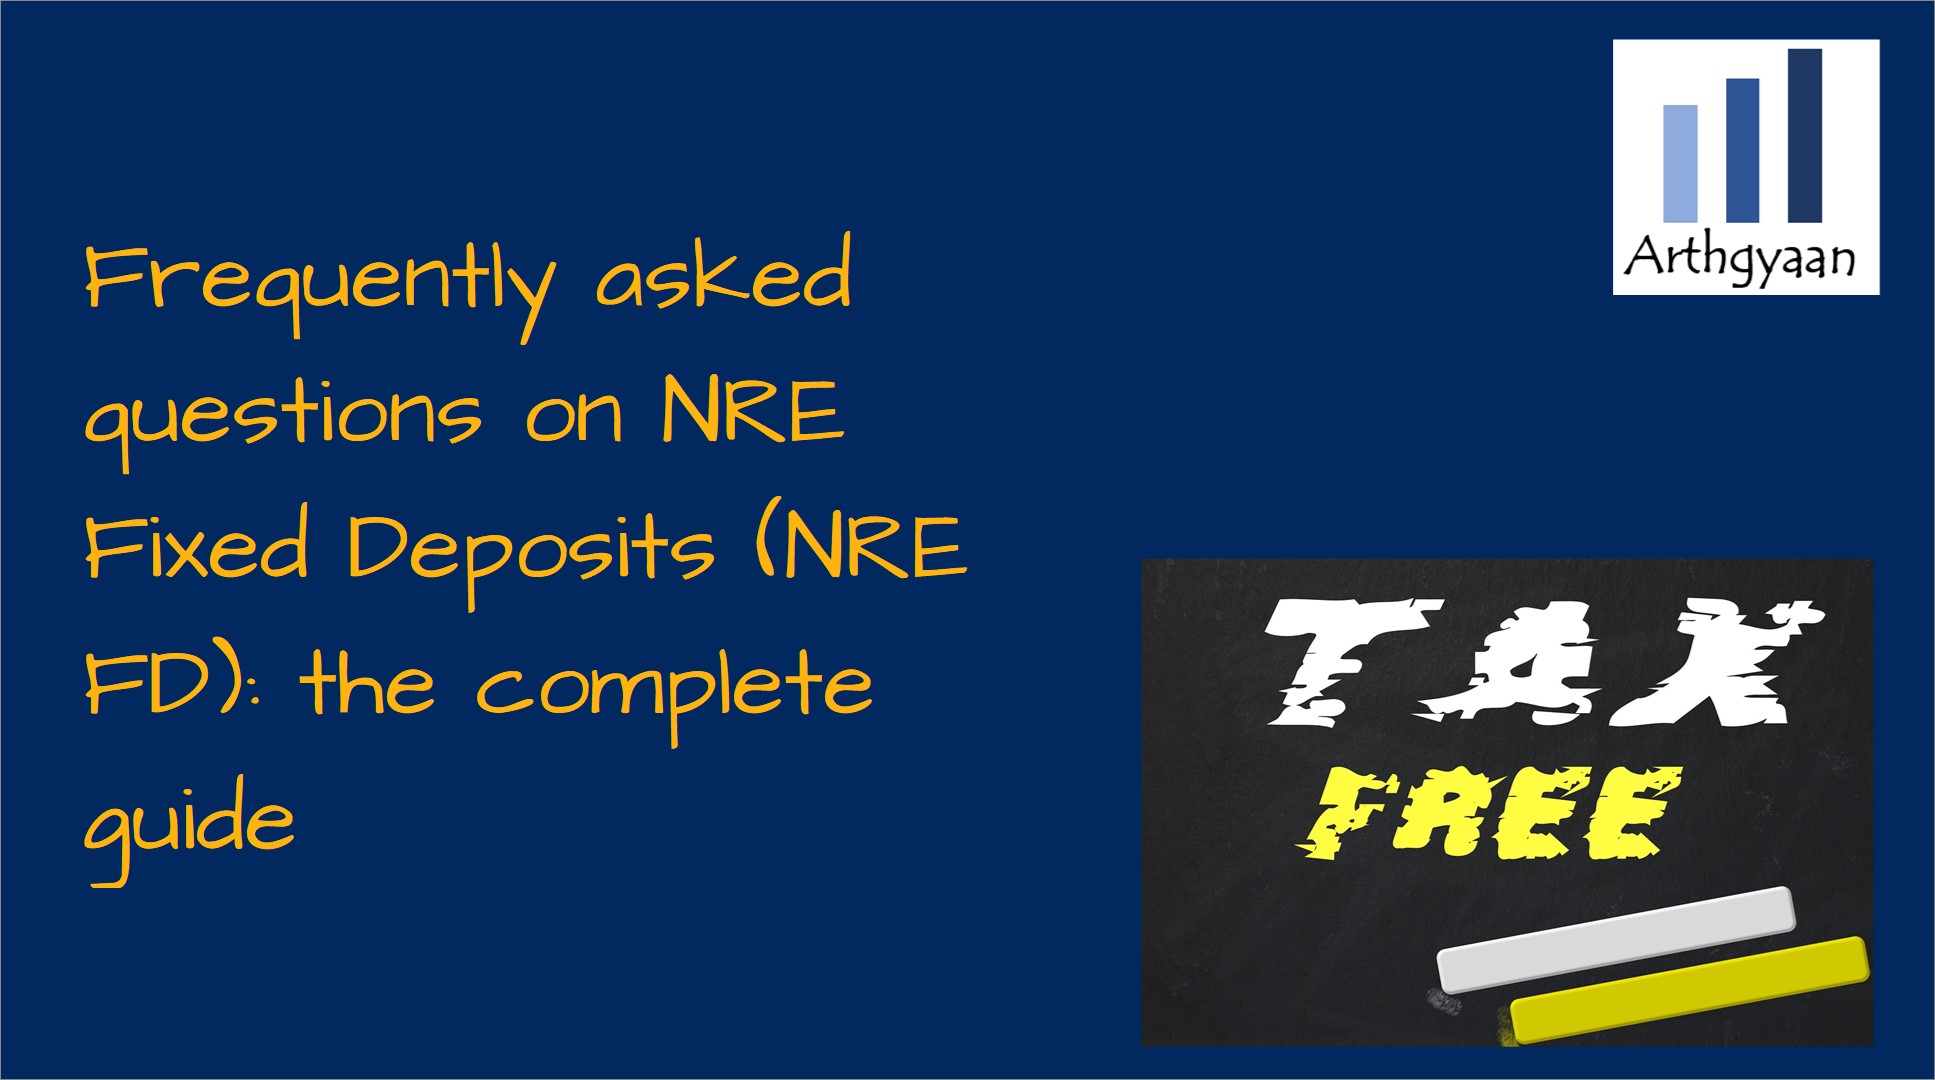 <p>This article compiles an exhaustive list of FAQs on the concept of NRE Fixed Deposits (NRE FD).</p>

